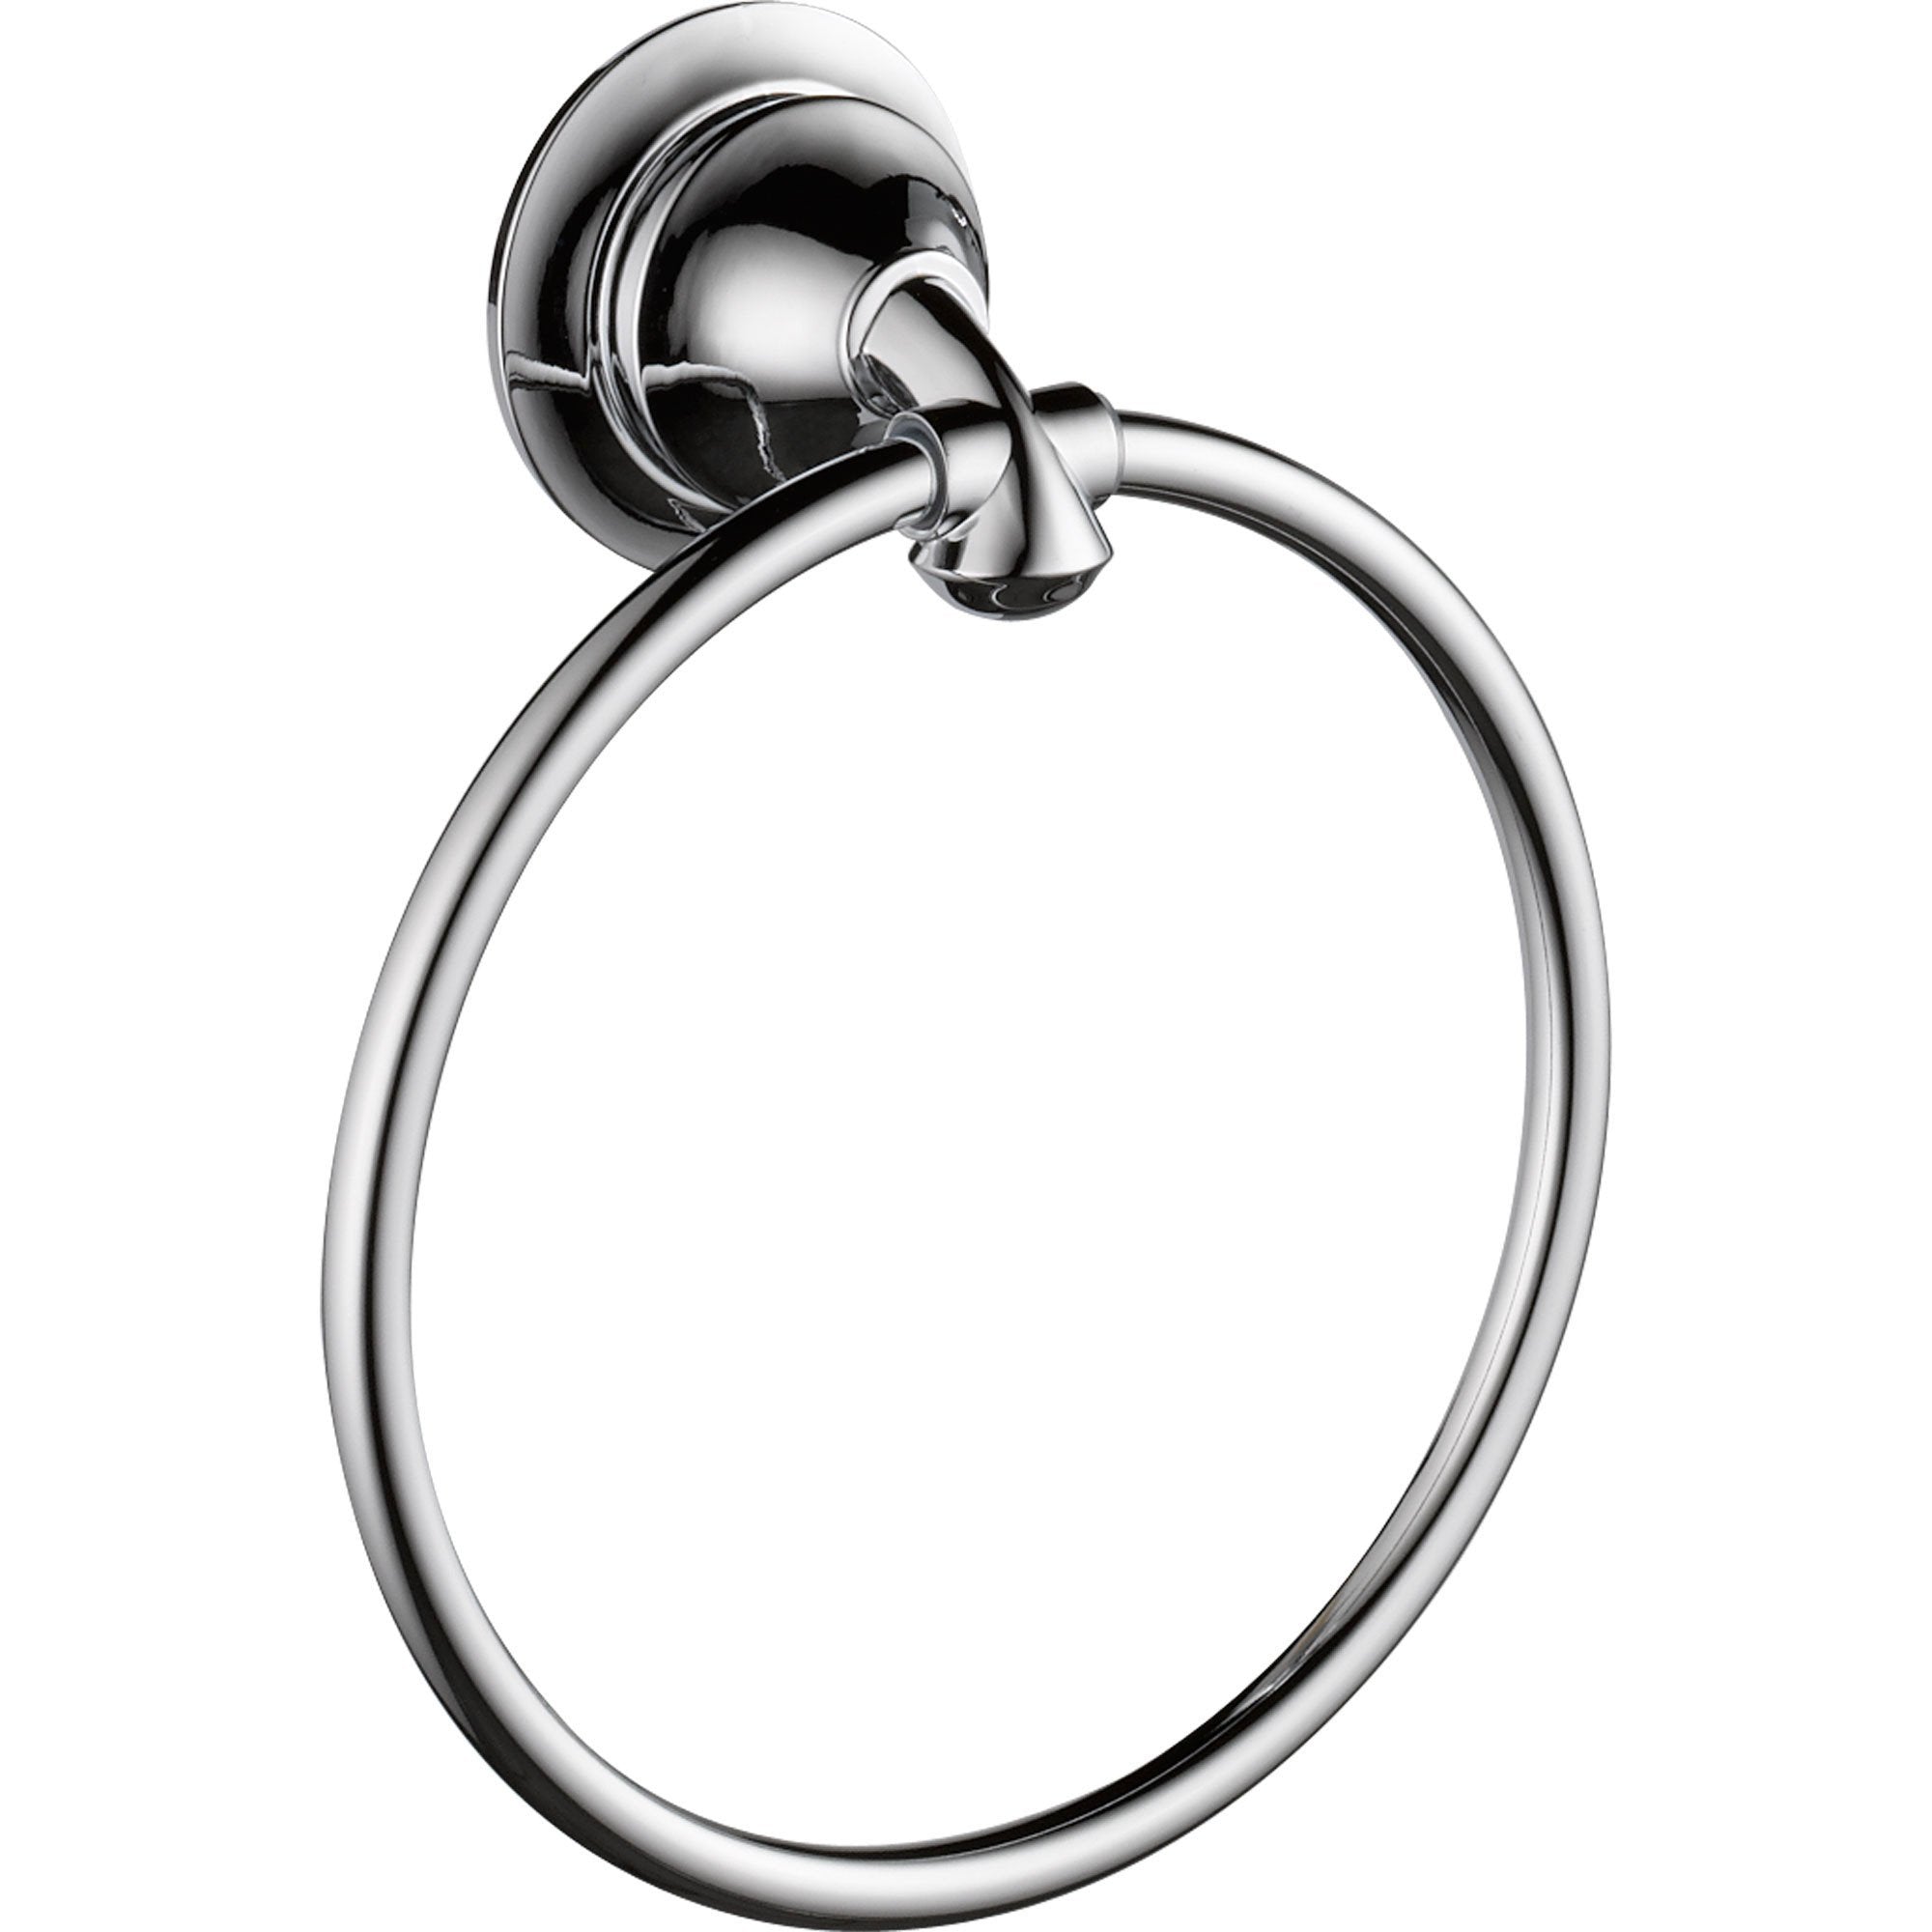 Delta Linden Bathroom Accessory Hand Towel Ring in Chrome 555651